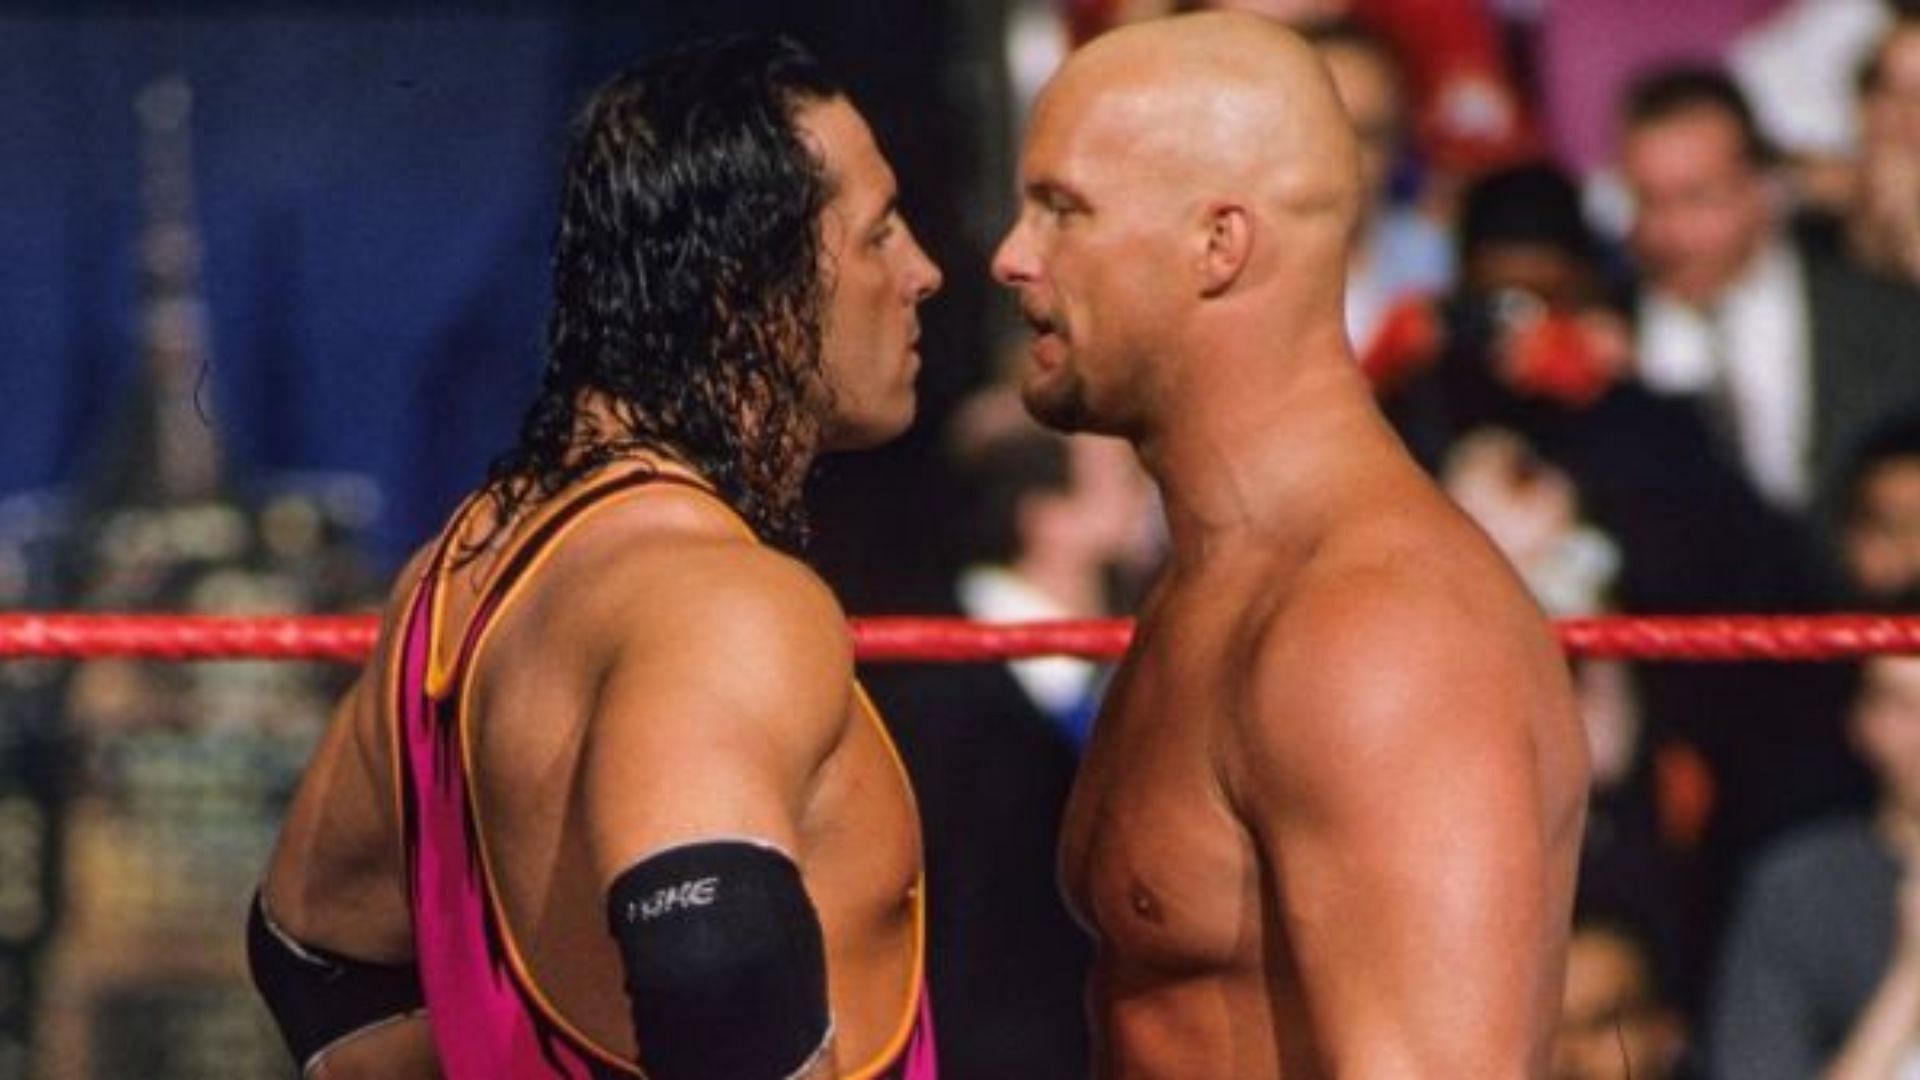 Bret Hart and Steve Austin met in their historic clash at WrestleMania 13